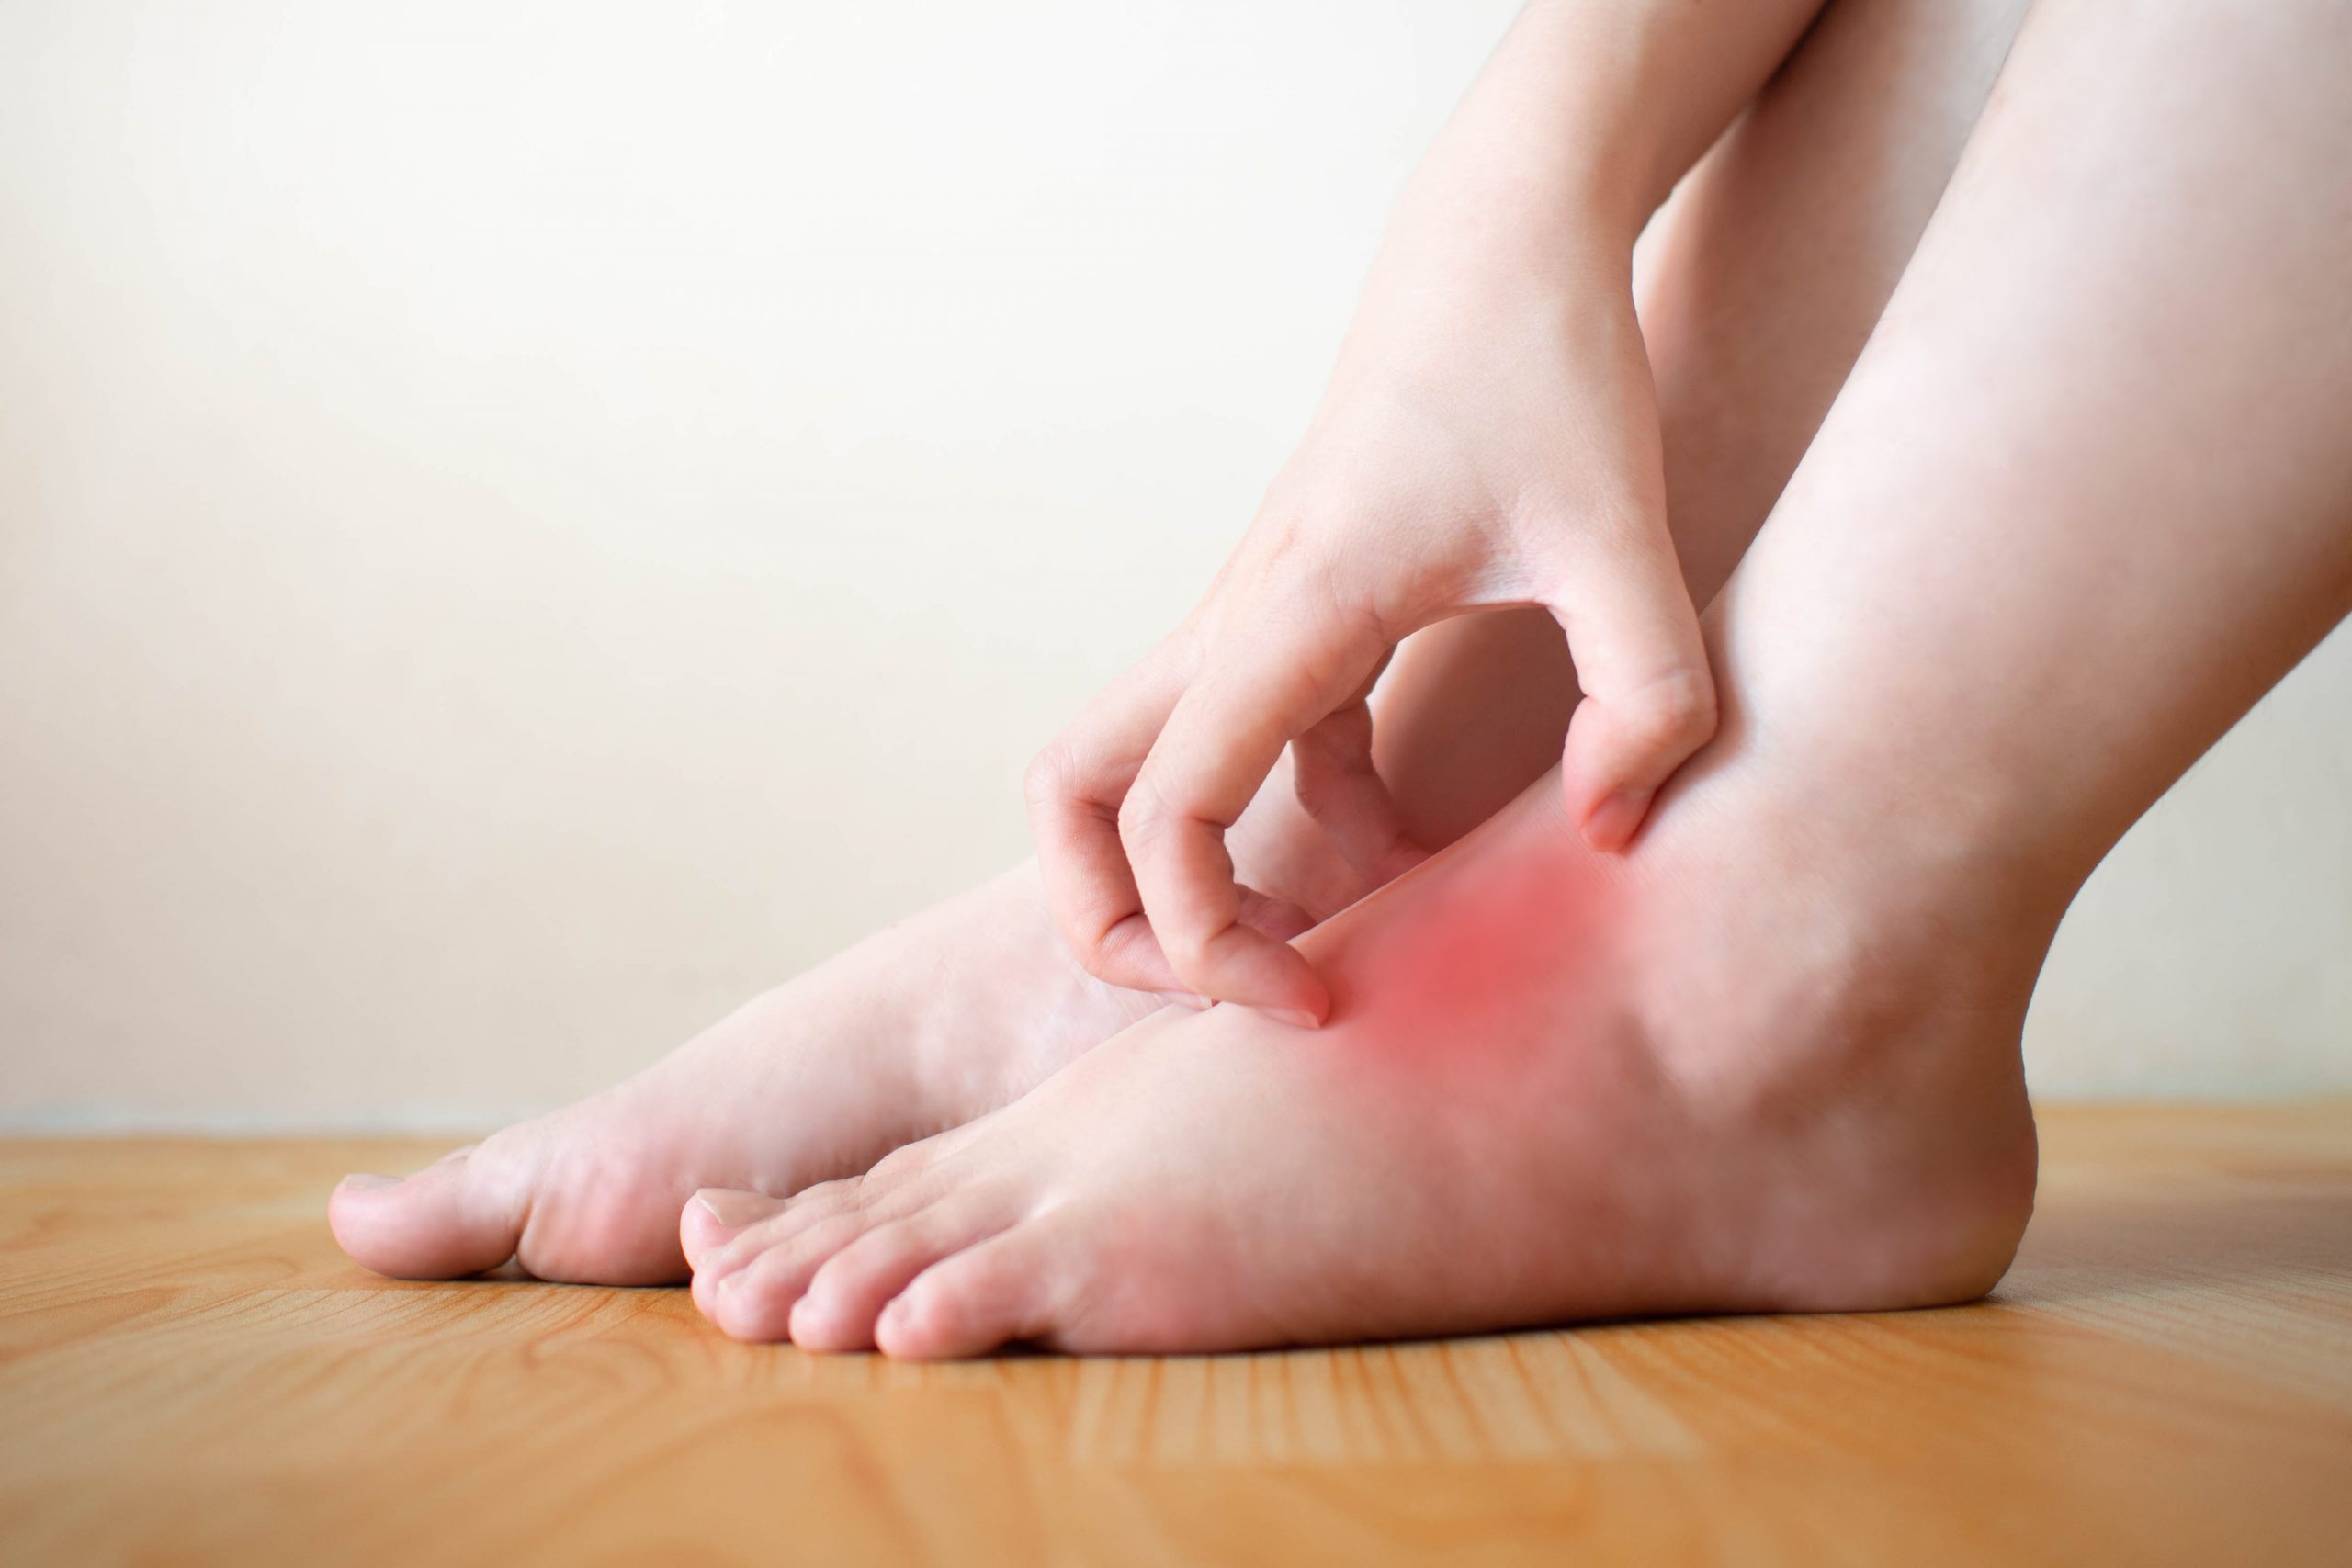 Foot Burning At Night? Causes And How To Easily Stop It